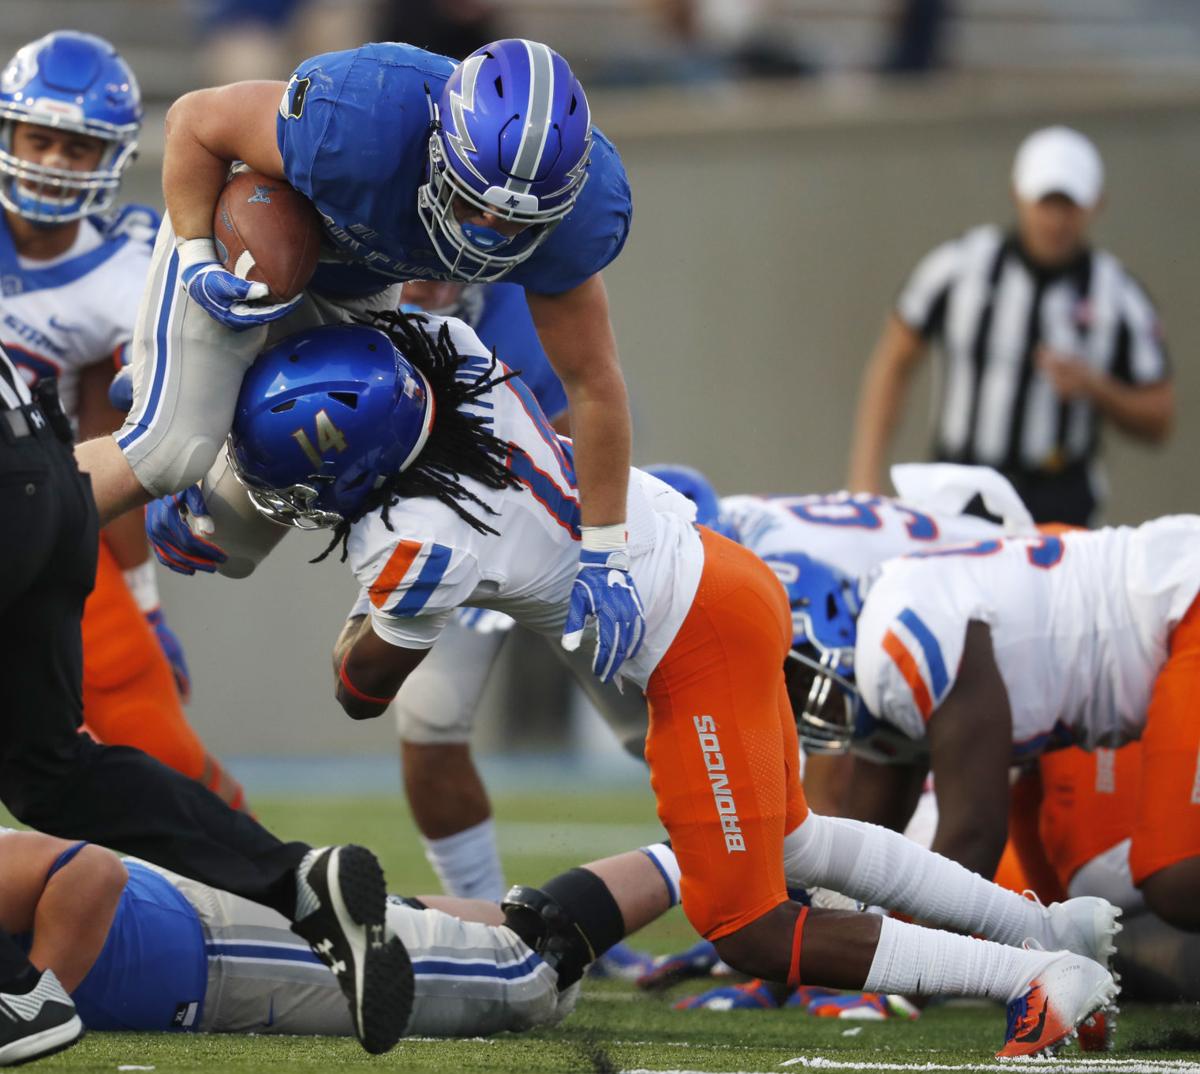 Finally! Boise State tops Air Force 48-38 for first ever win at Falcon